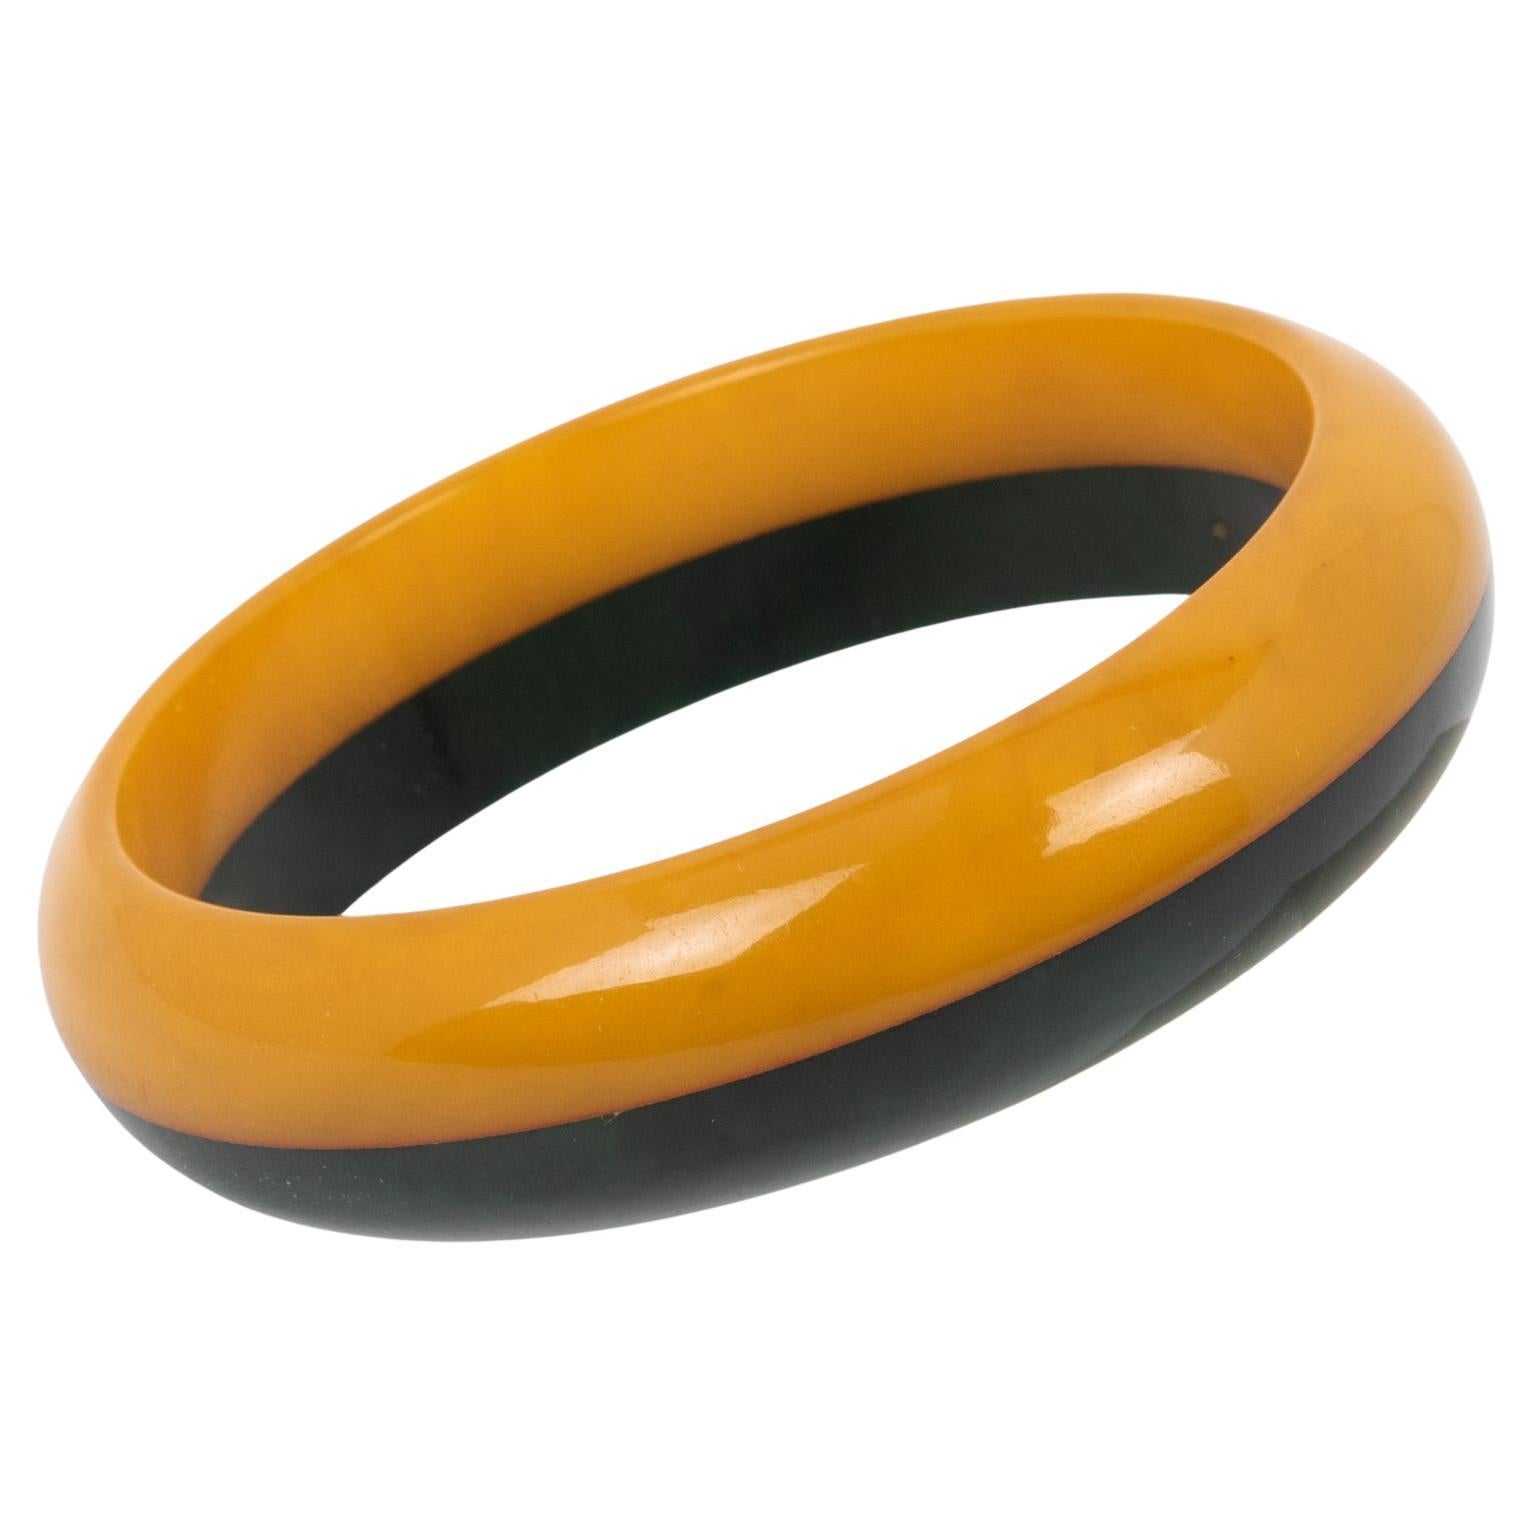 Bakelite Bracelet Laminated Layers Bangle Butterscotch and Green Marble For Sale